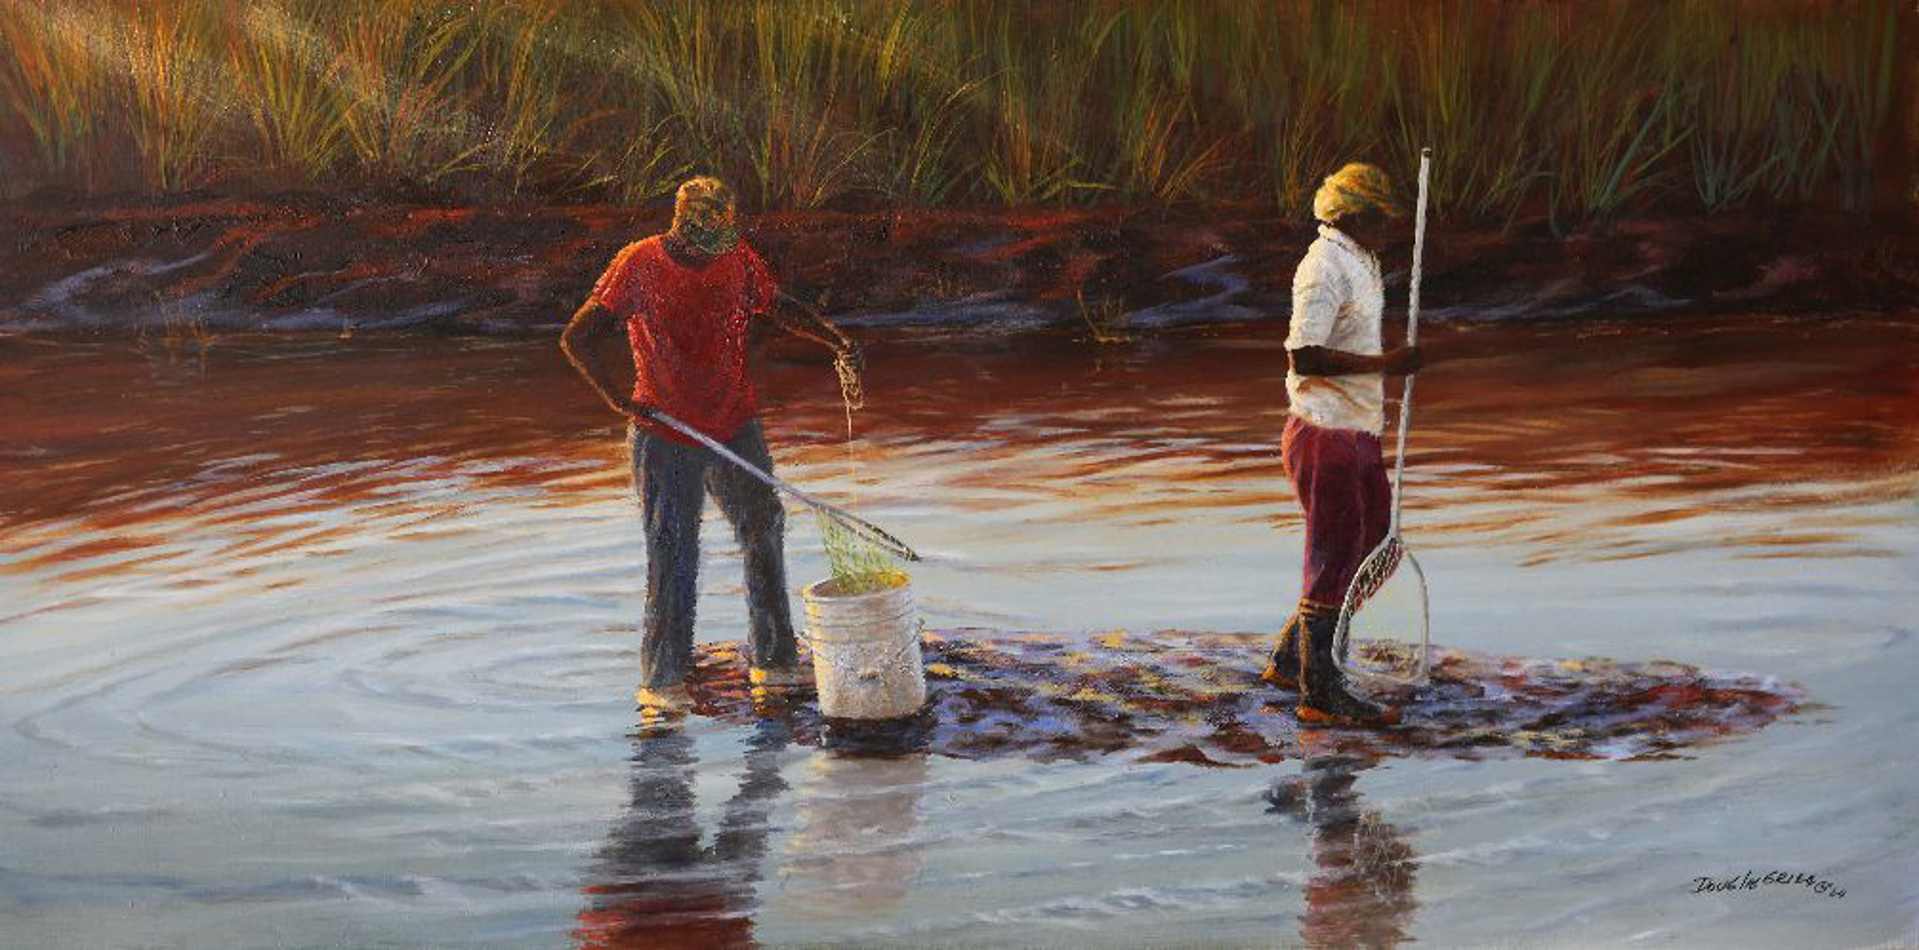 Crabbing in the Lowcountry by Douglas Grier